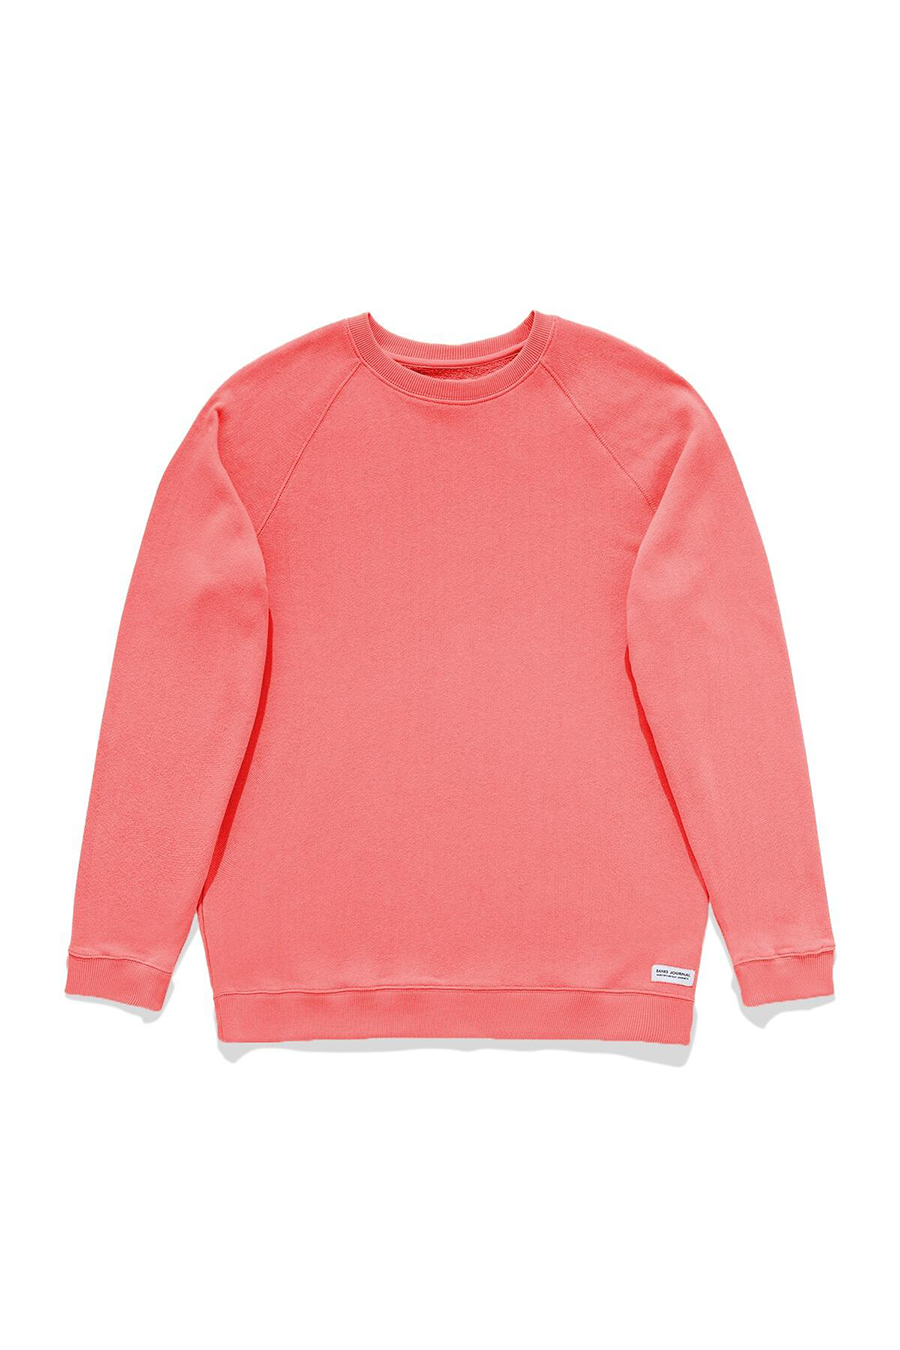 Solar Trans Fleece | Faded Rose - Main Image Number 1 of 1